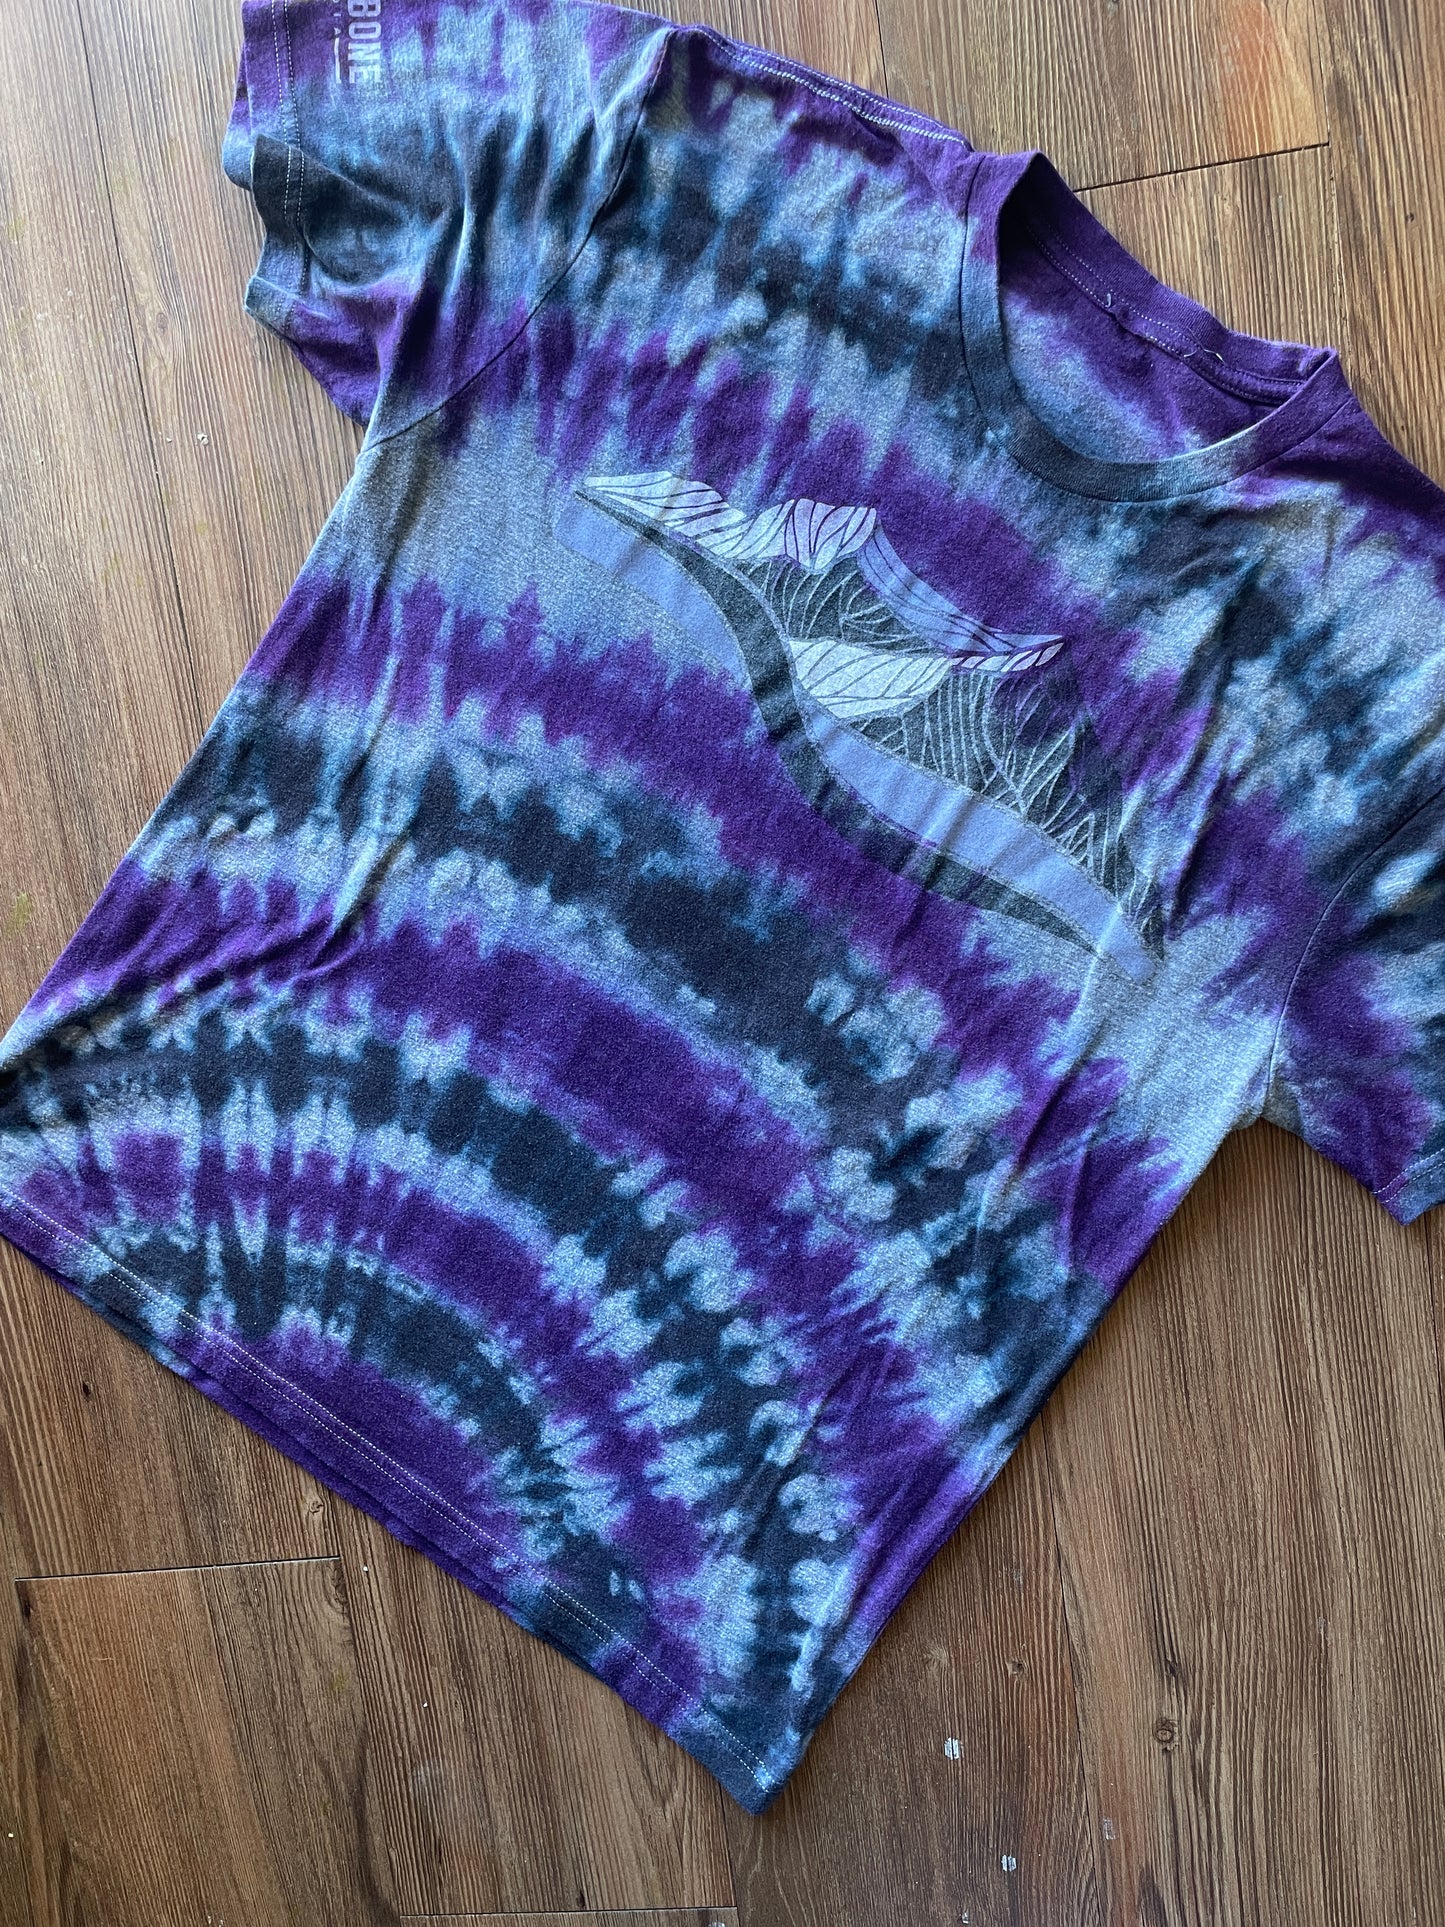 LARGE Men’s Purple Mountain Majesty Handmade Tie Dye T-Shirt | One-Of-a-Kind Purple, Gray, and Black Short Sleeve